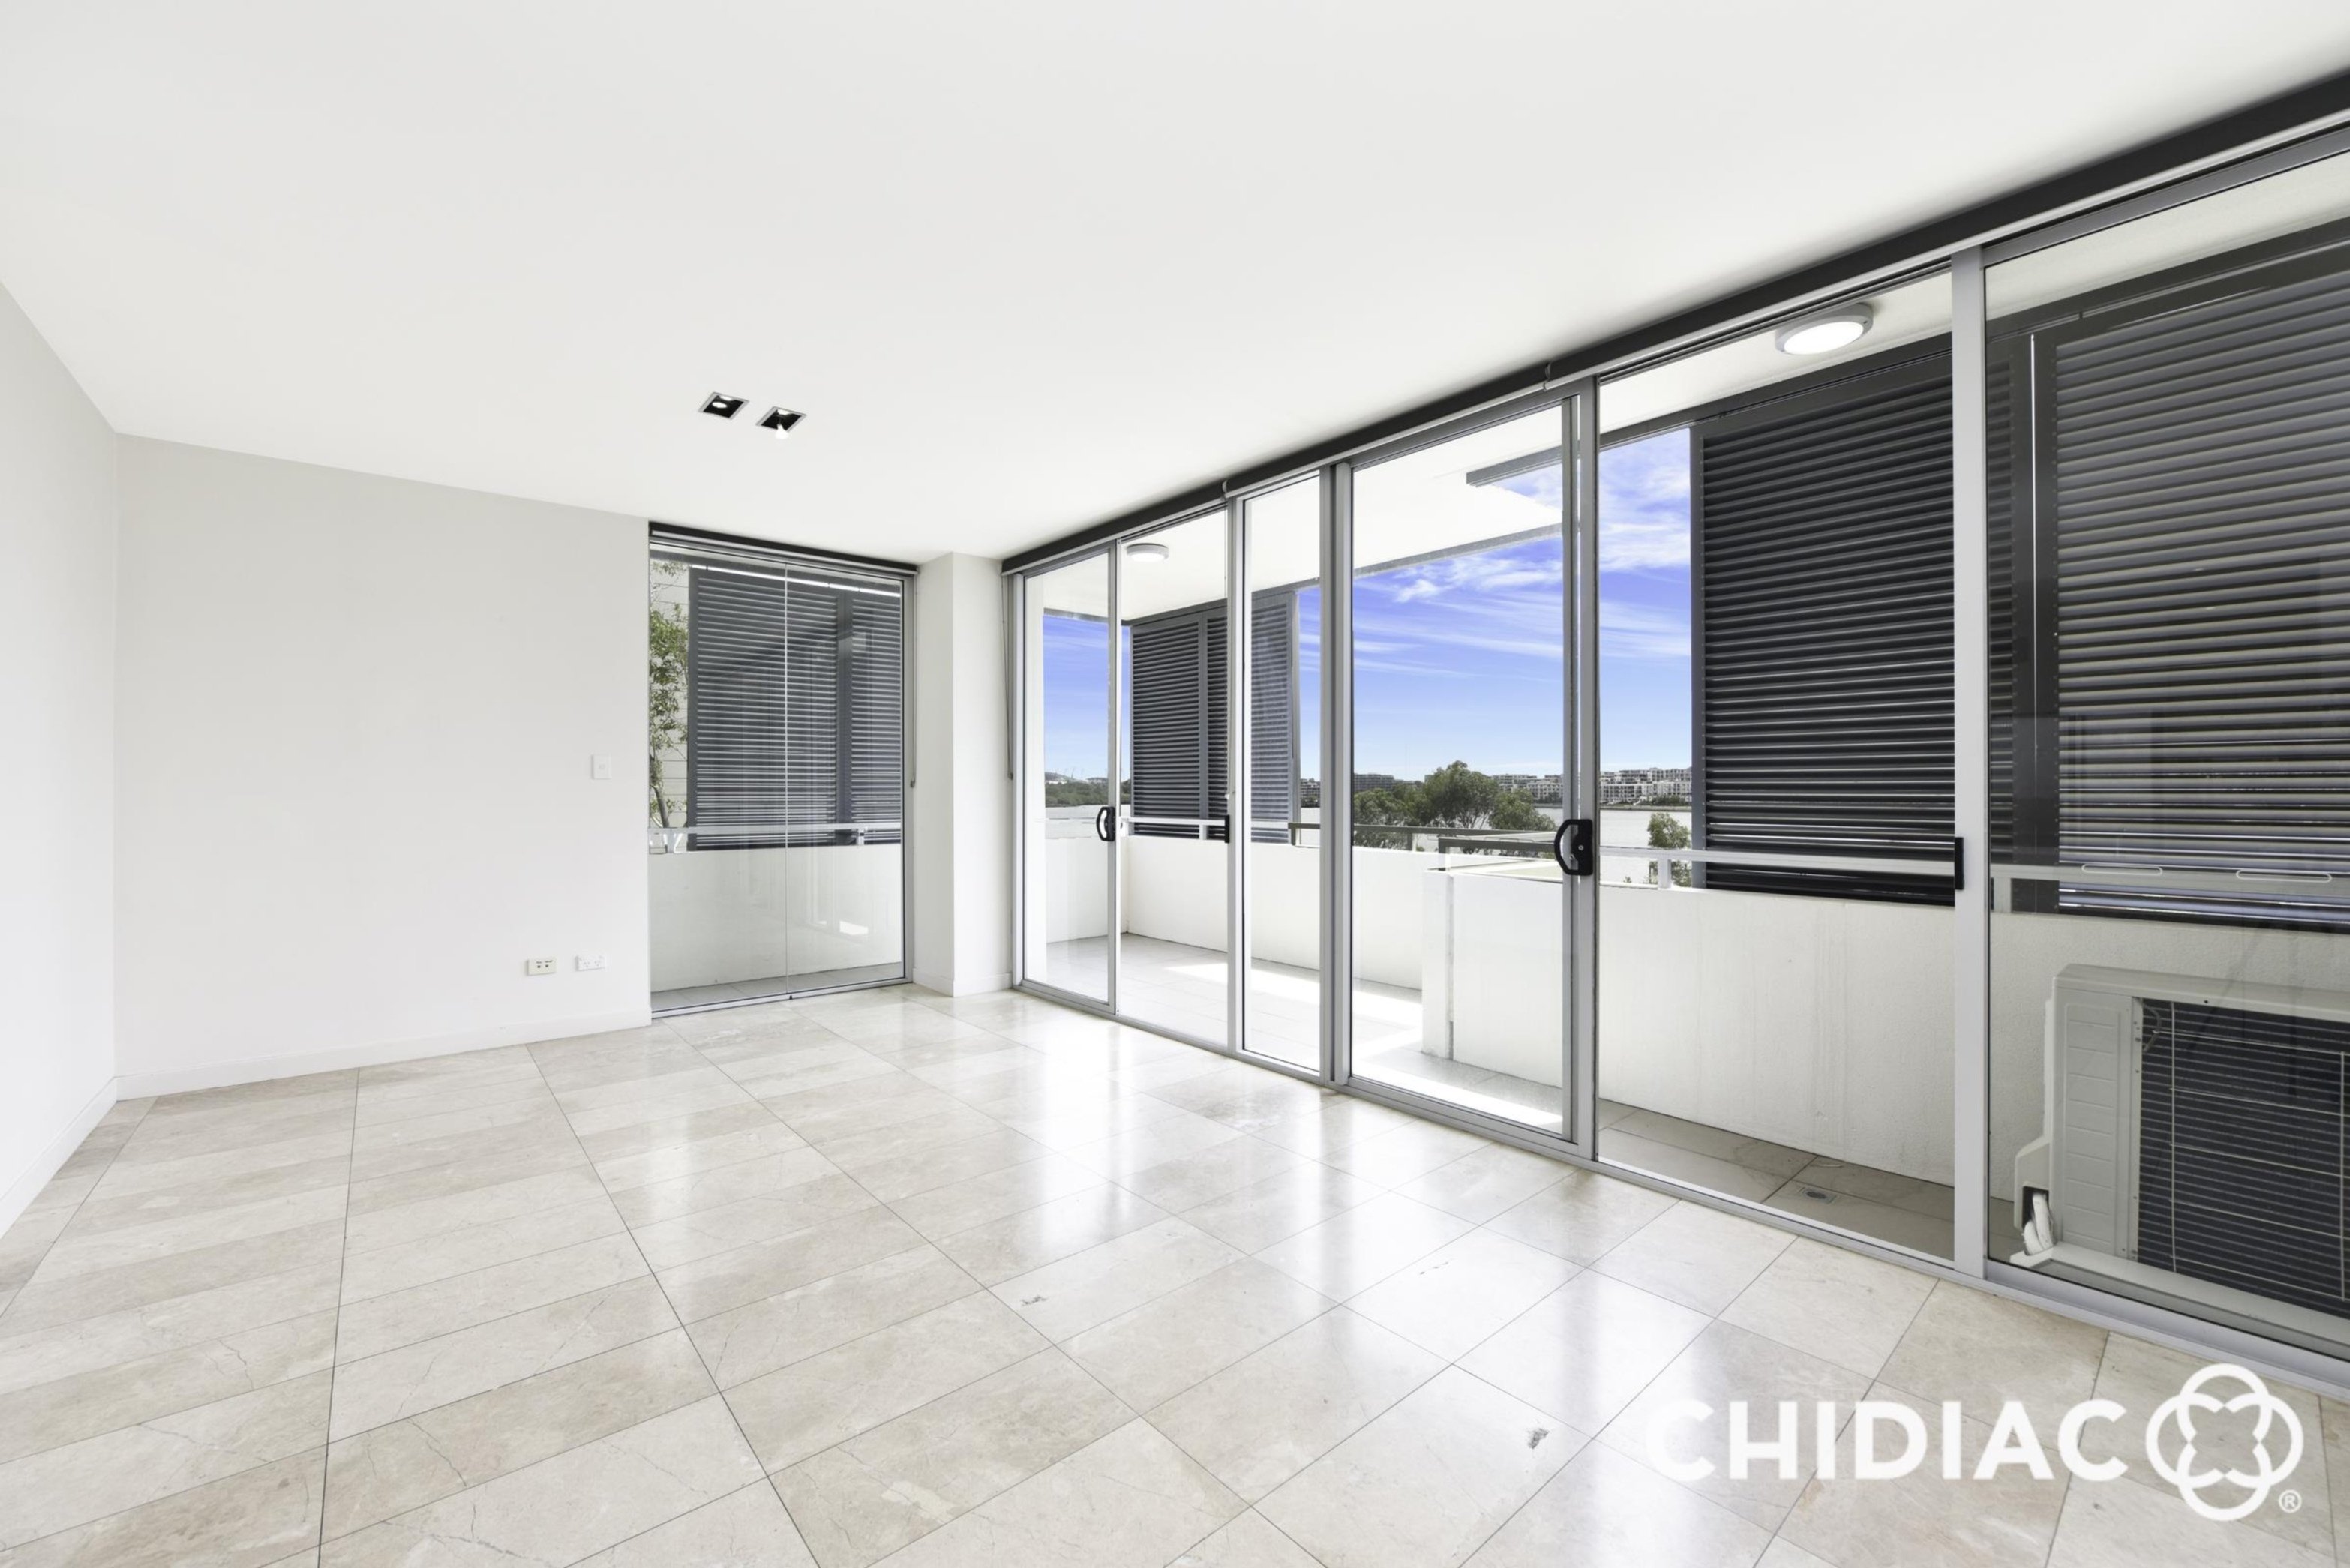 E204/10-16 Marquet Street, Rhodes Leased by Chidiac Realty - image 3